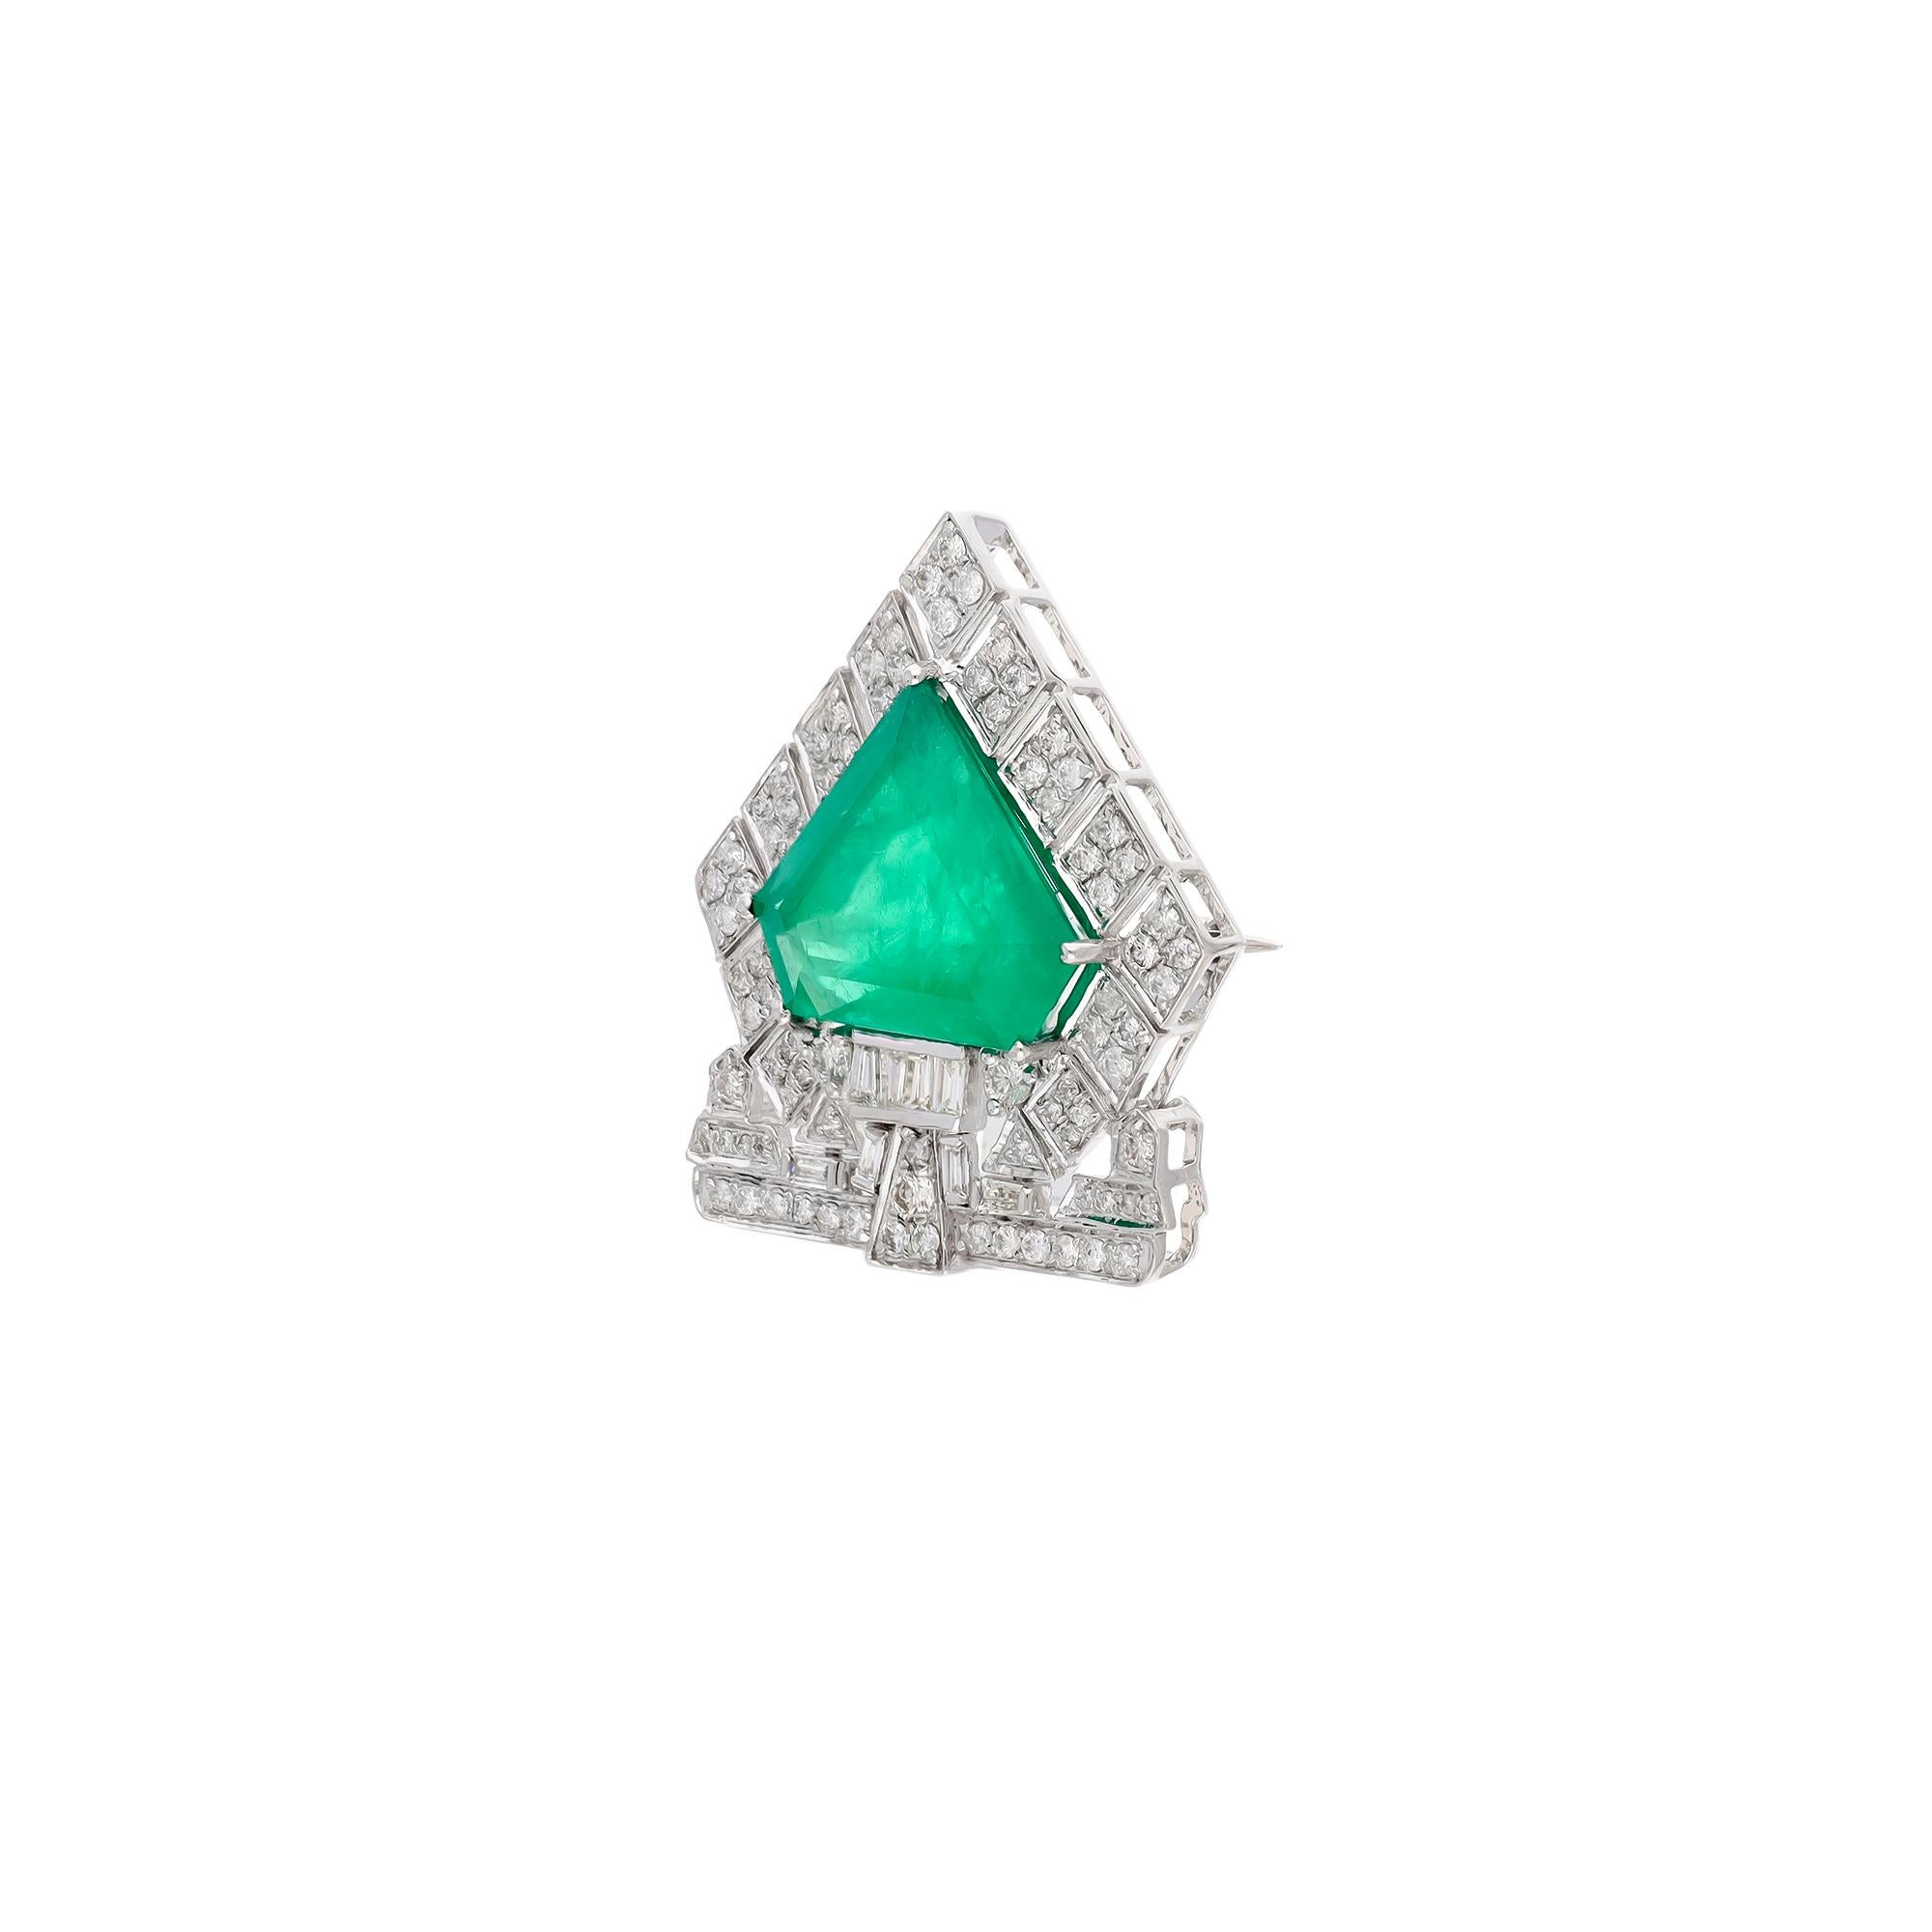 This is a natural Zambian brooch  with diamonds and 18k gold. The emeralds are very high quality and very good quality diamonds the clarity is vsi and G colour


Emeralds : 7.01 carats
diamonds : 0.93 carats
gold : 5.443 gm

This is a brand new